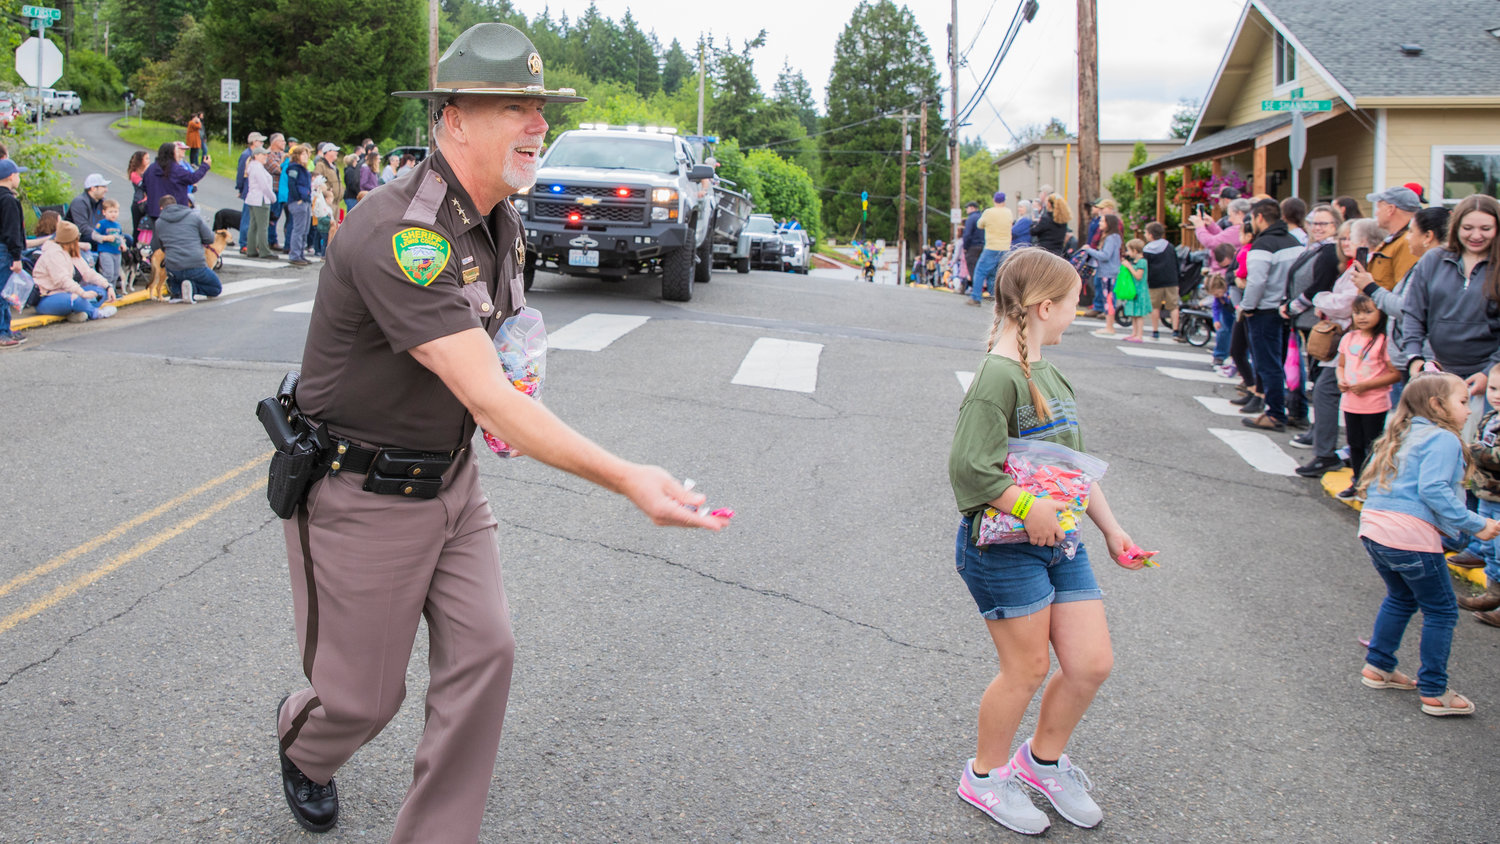 Sheriff Rob Snaza smiles while tossing candy during the Egg Days Festival parade in Winlock on Saturday.